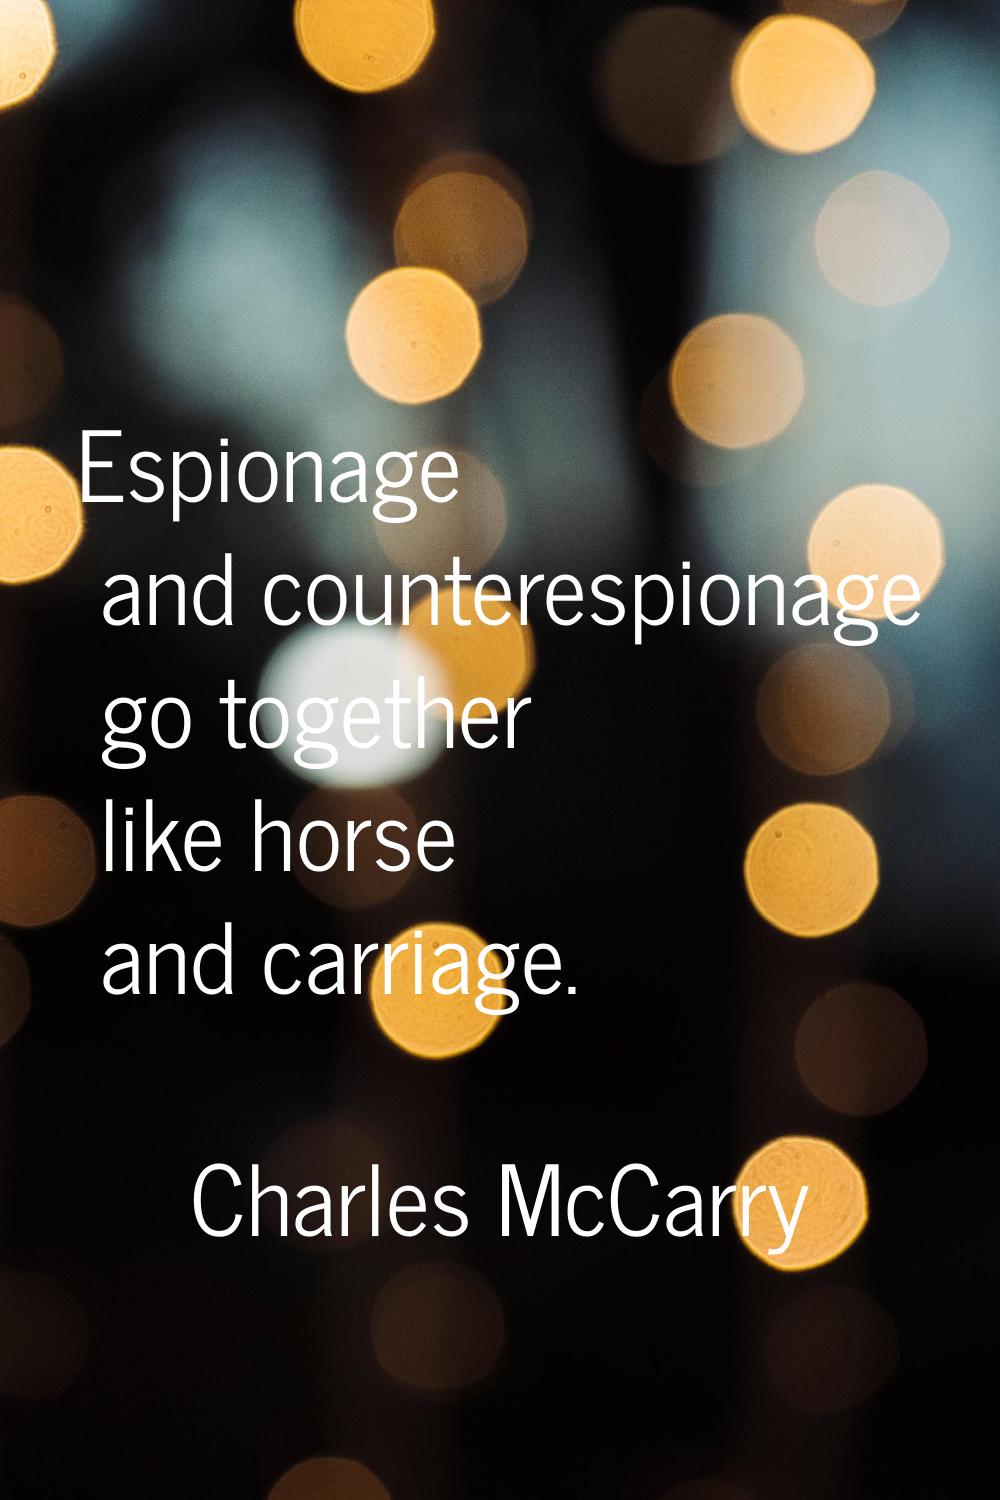 Espionage and counterespionage go together like horse and carriage.